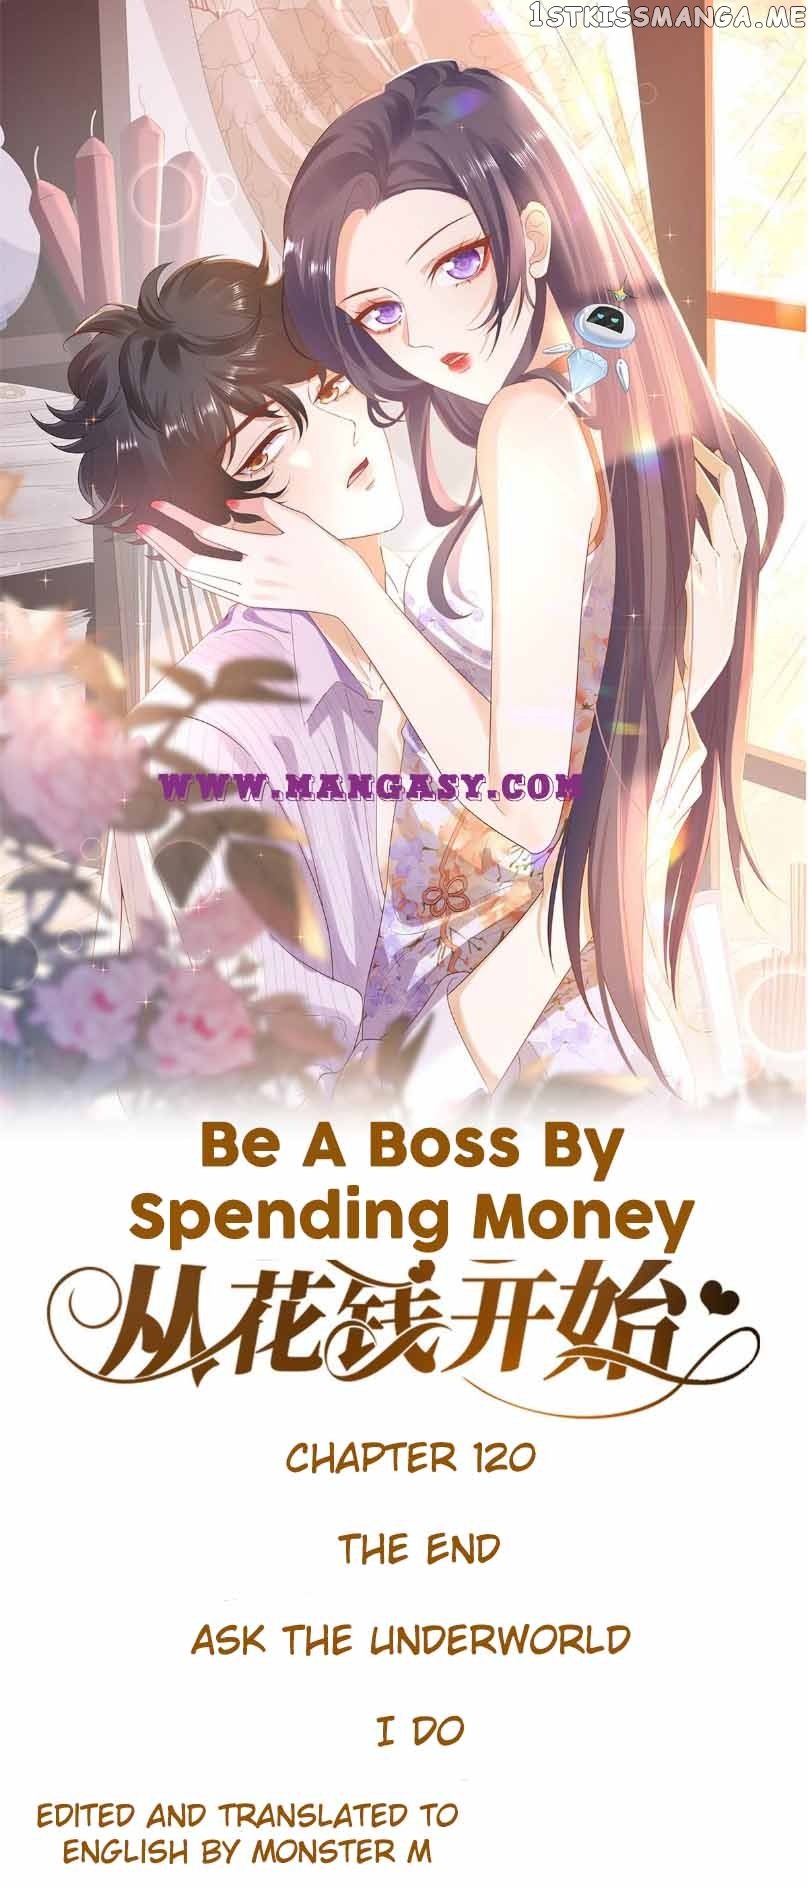 Becoming a Big Boss Starts with Spending Money chapter 120